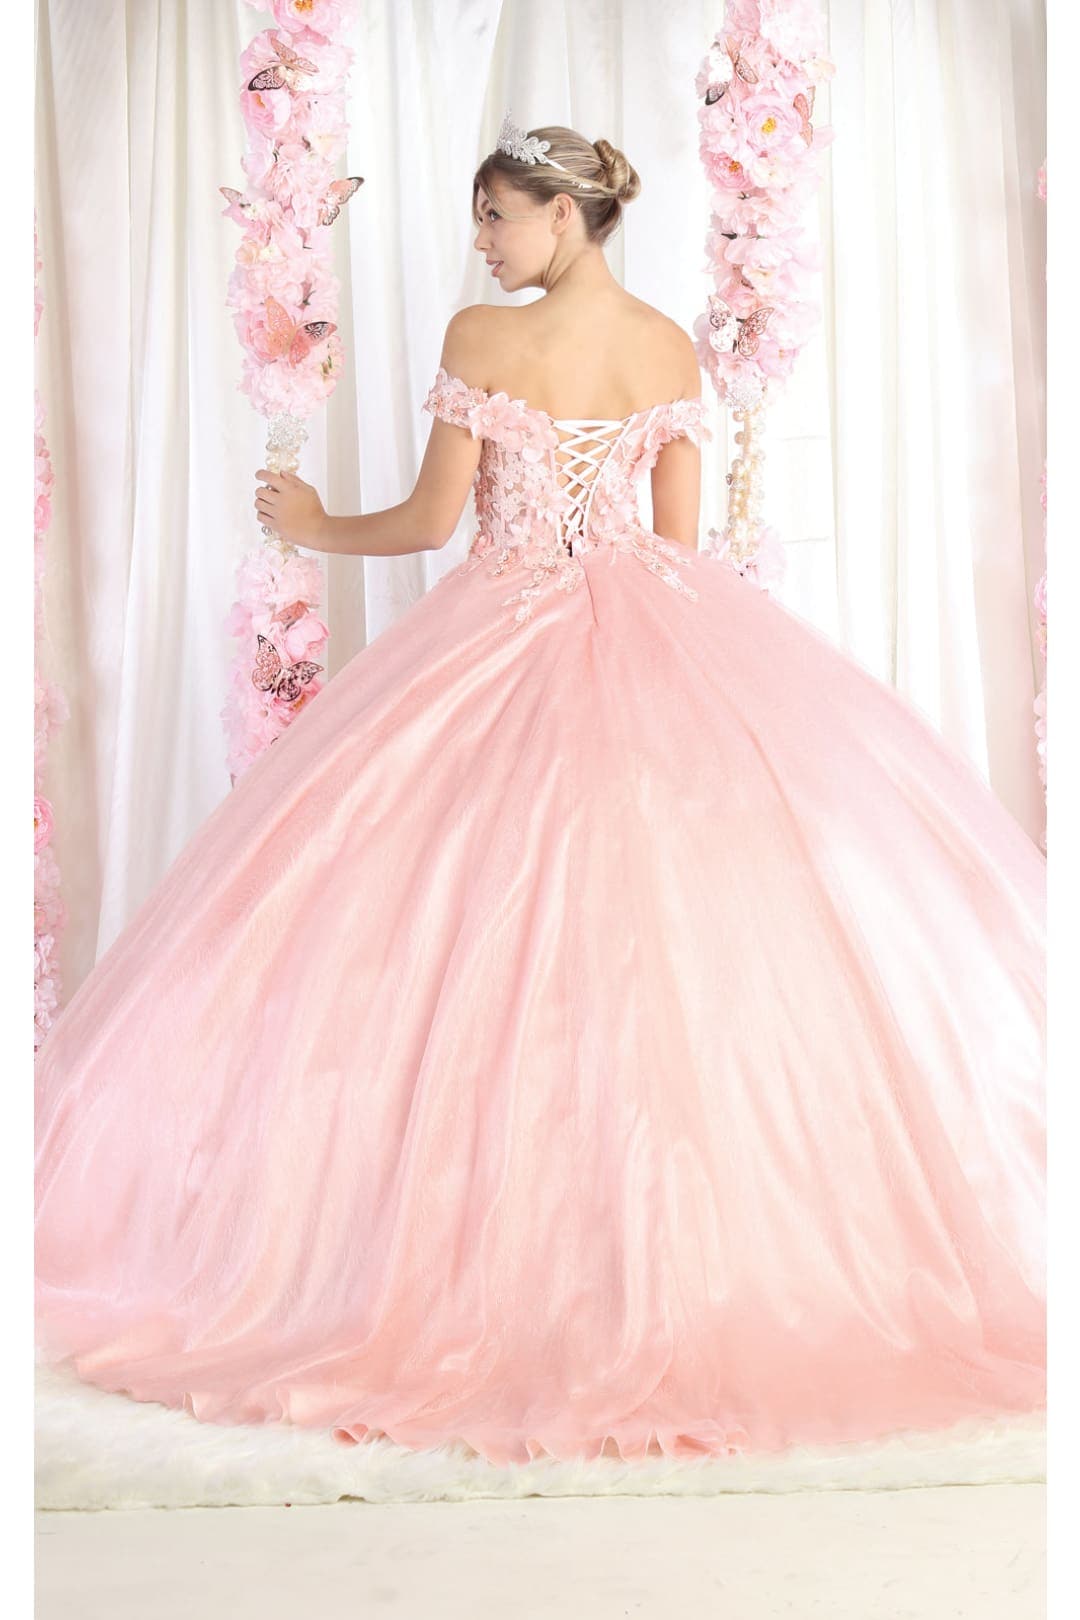 Layla K LK166 Off The Shoulder Corset Princess Ball Gown